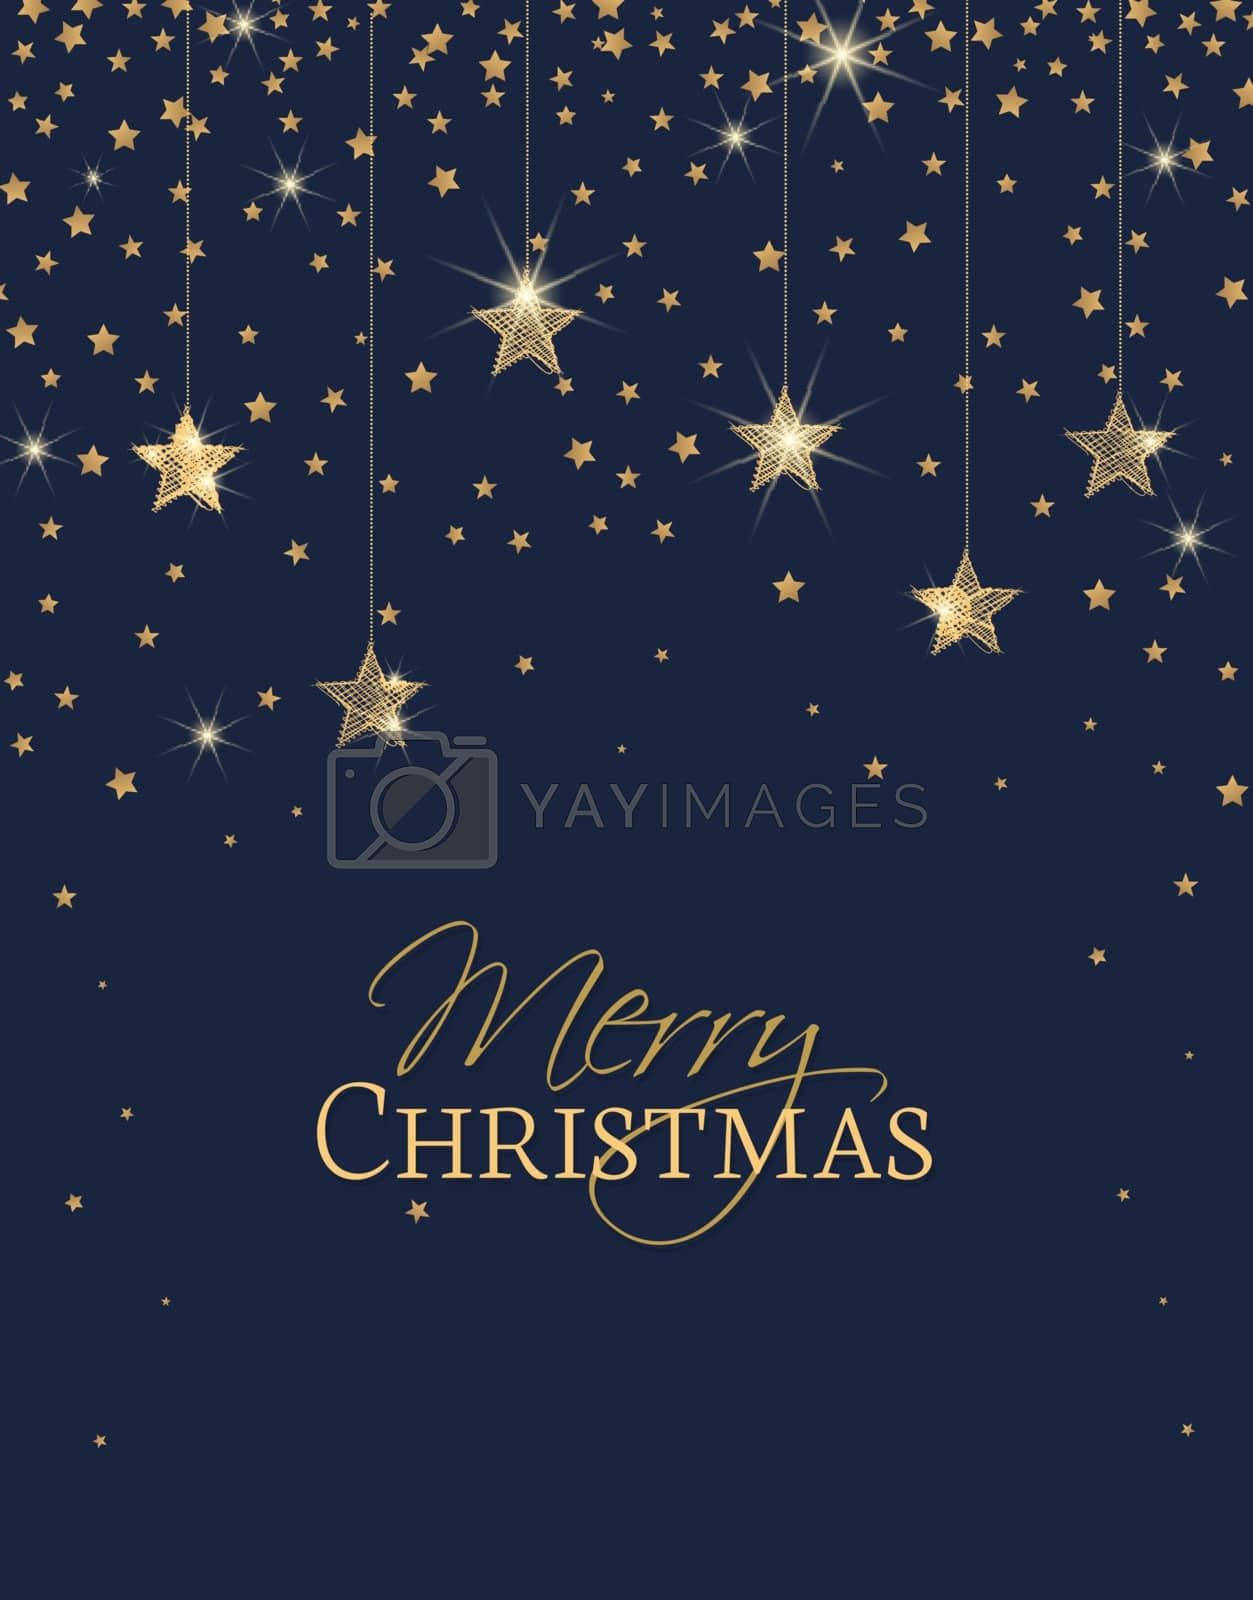 Royalty free image of Merry Christmas stars by odina222